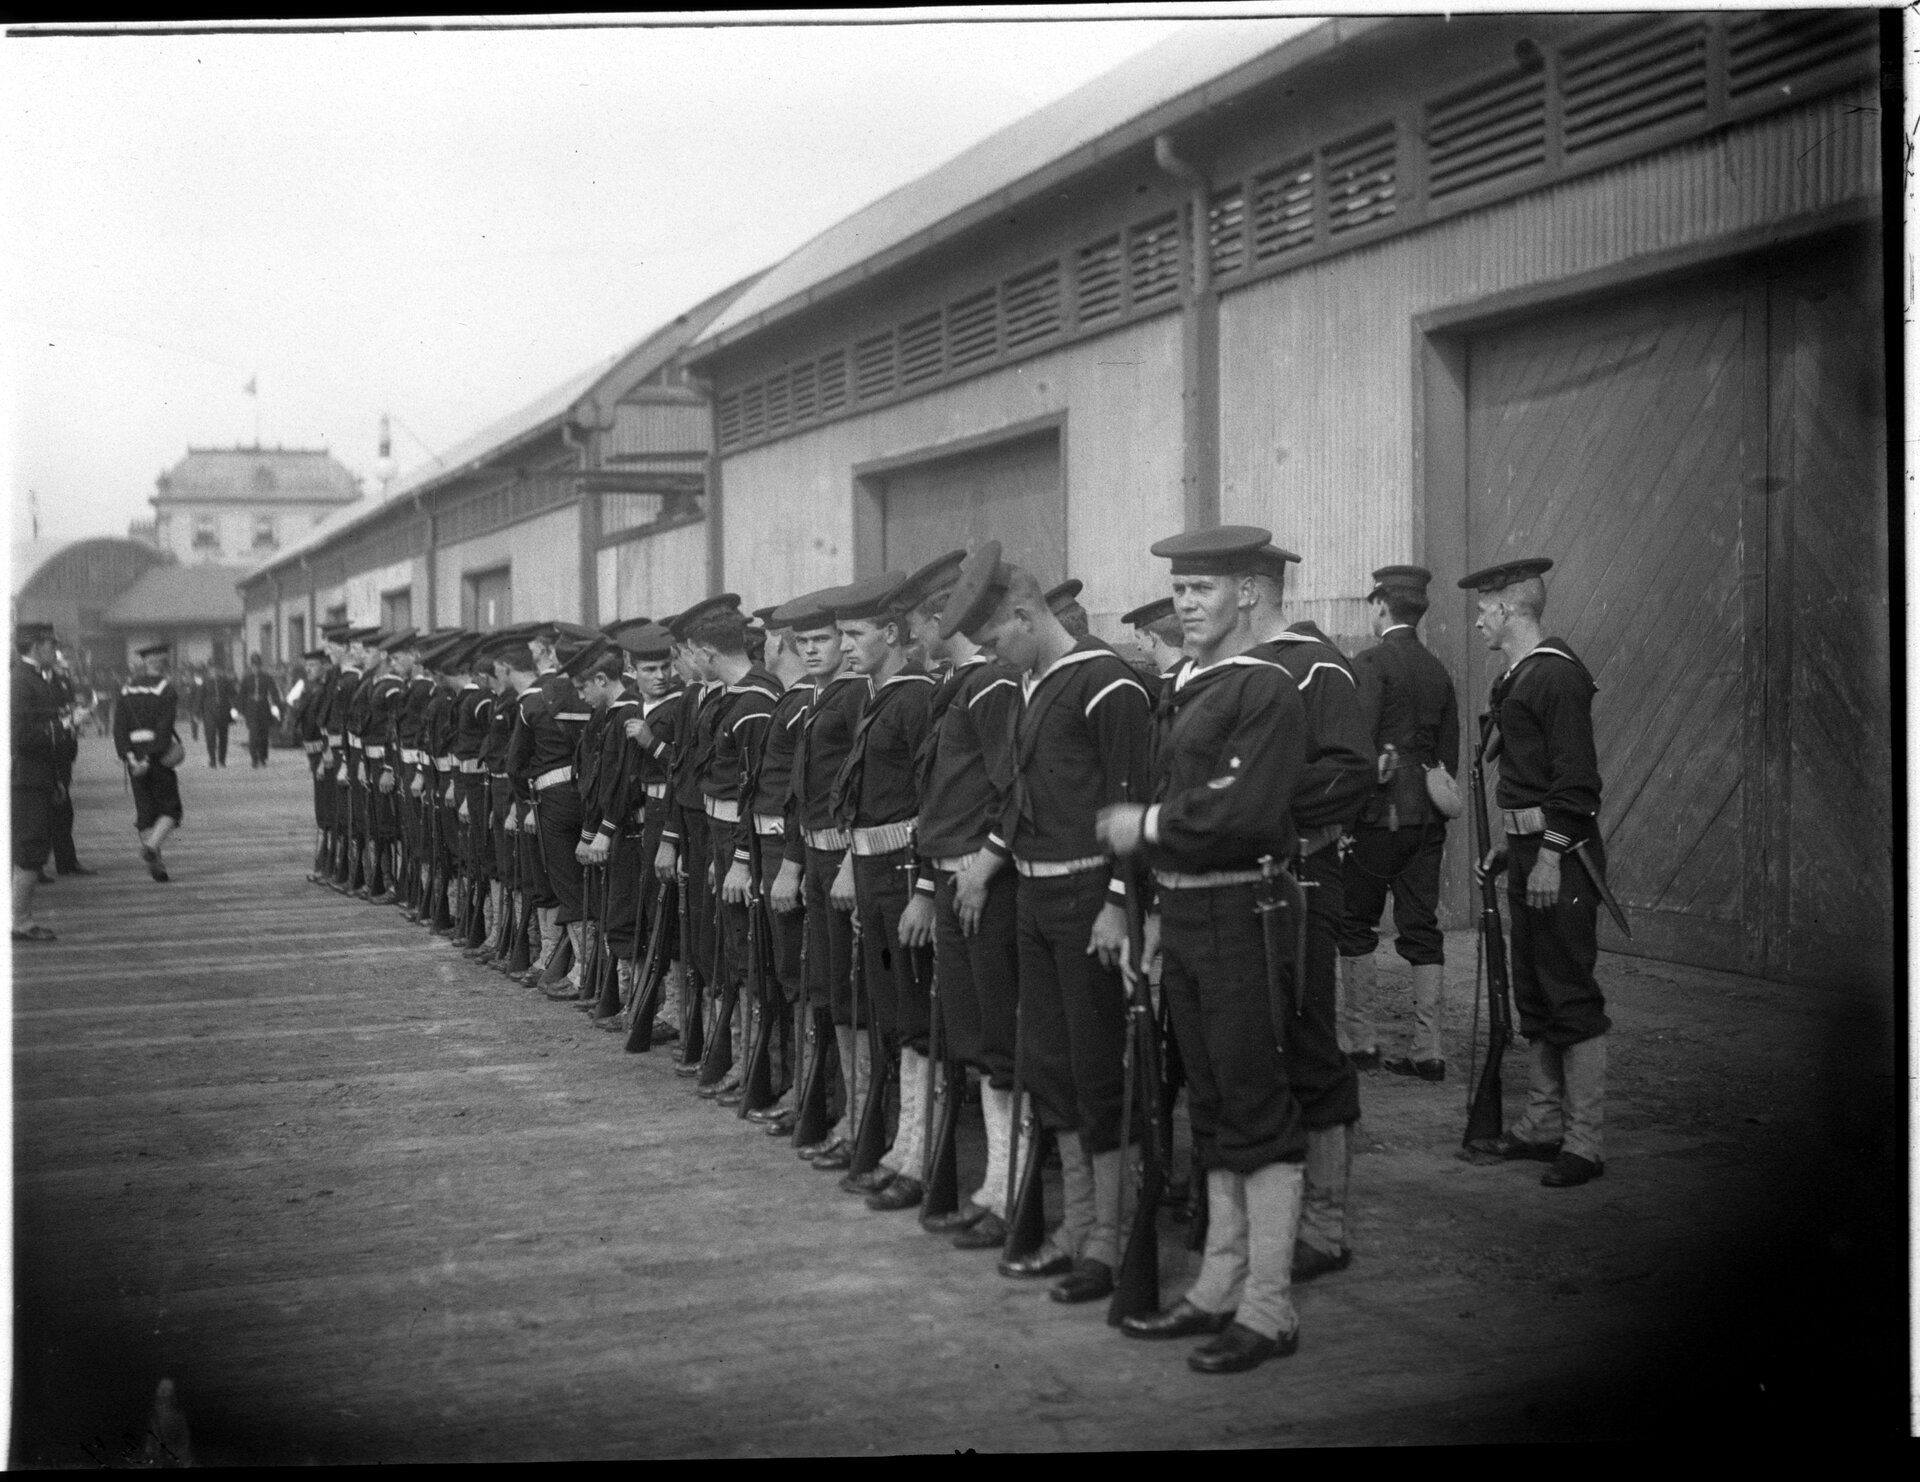 Sailors stand at attention on a wharf